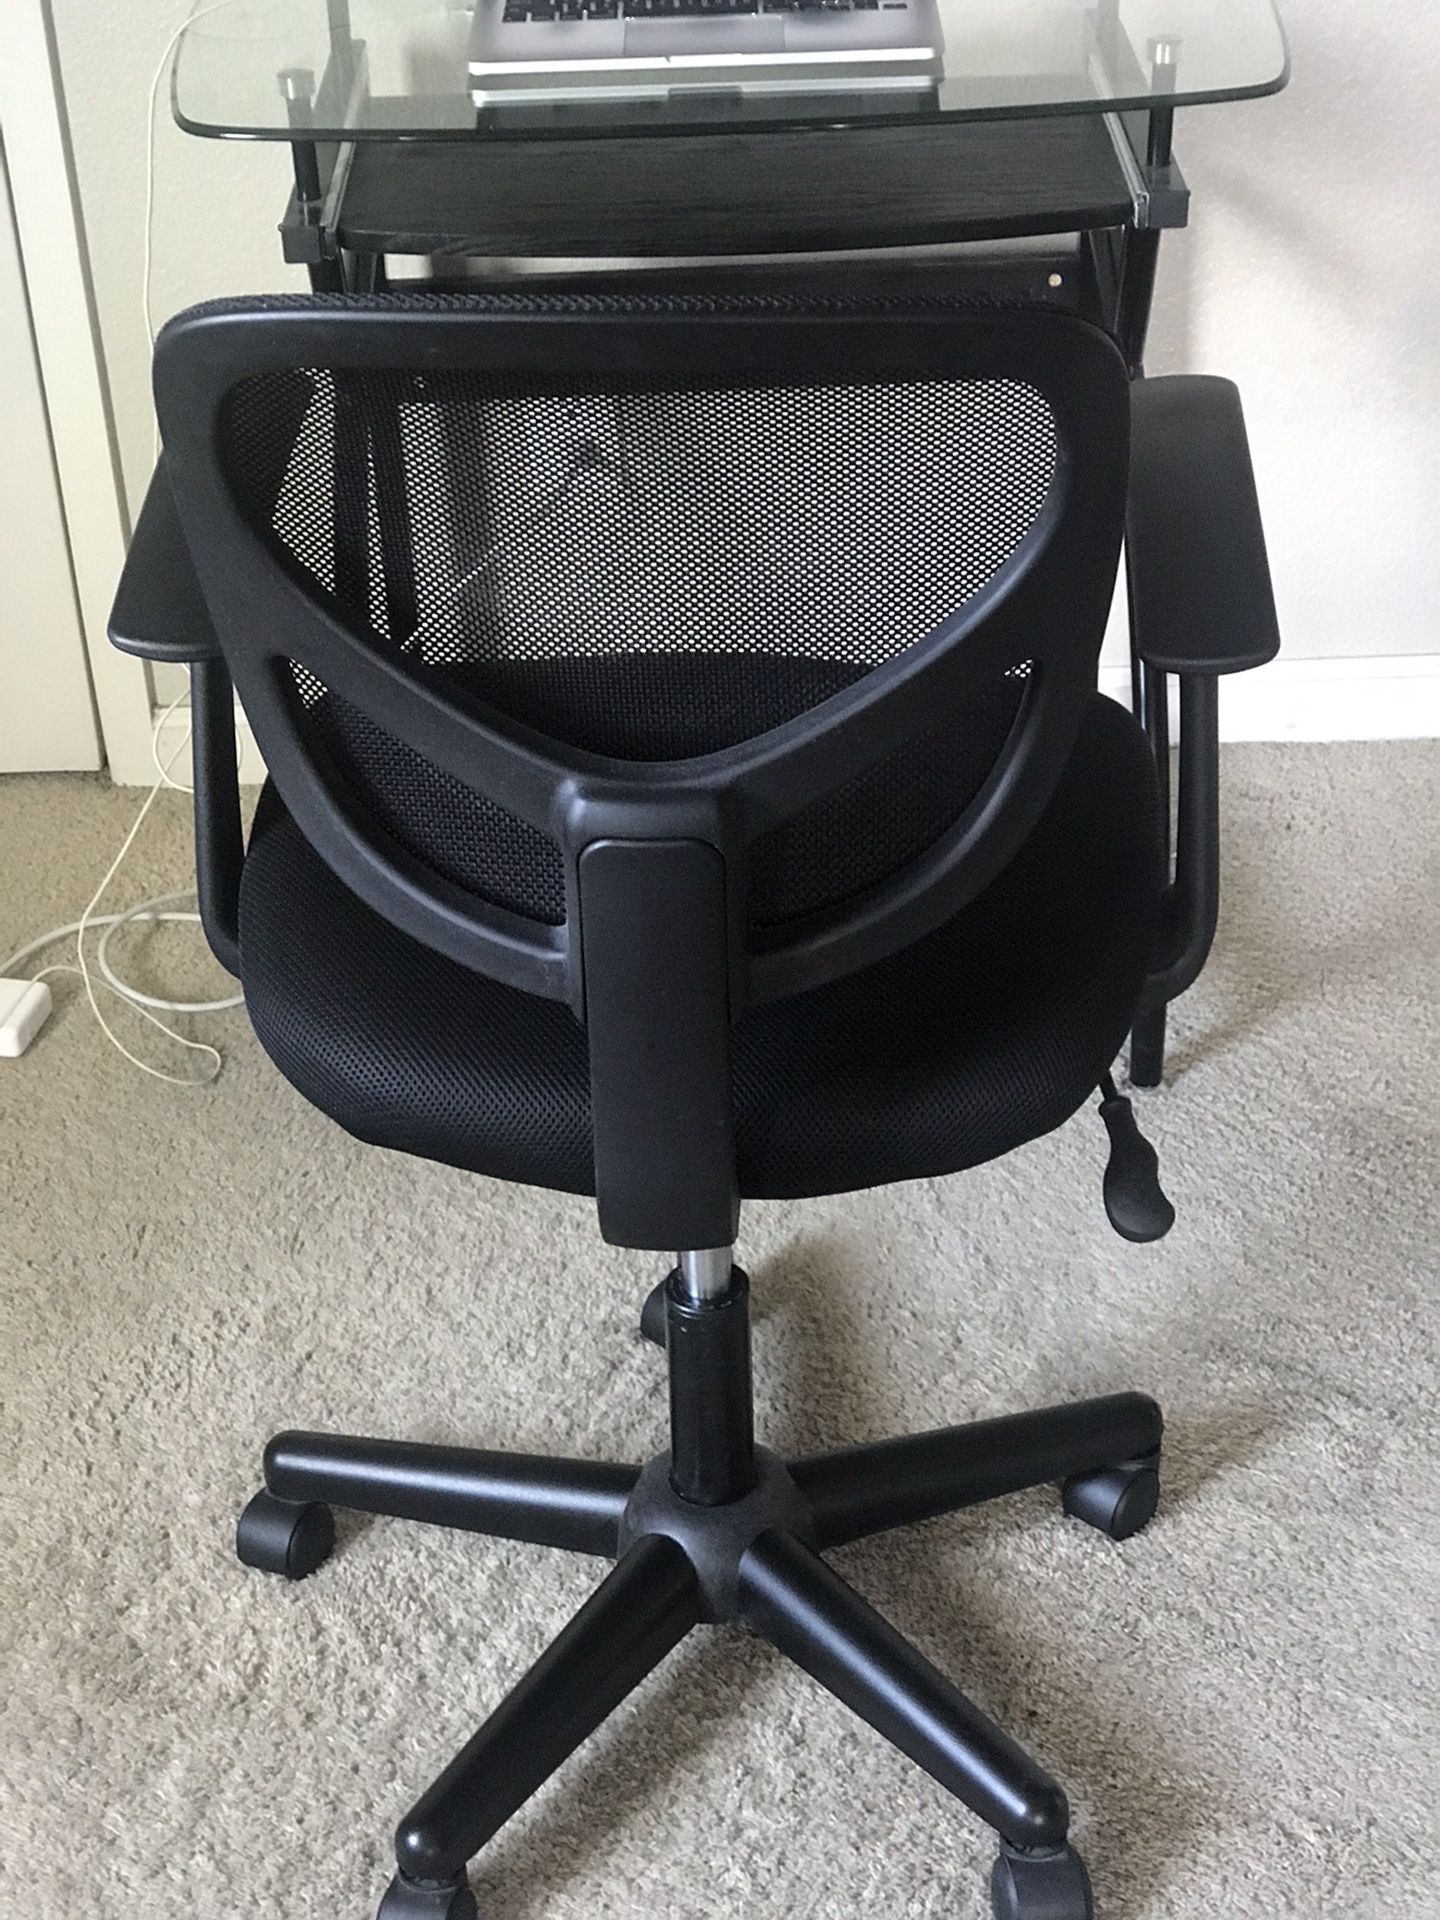 BlackDesk chair with arm rests